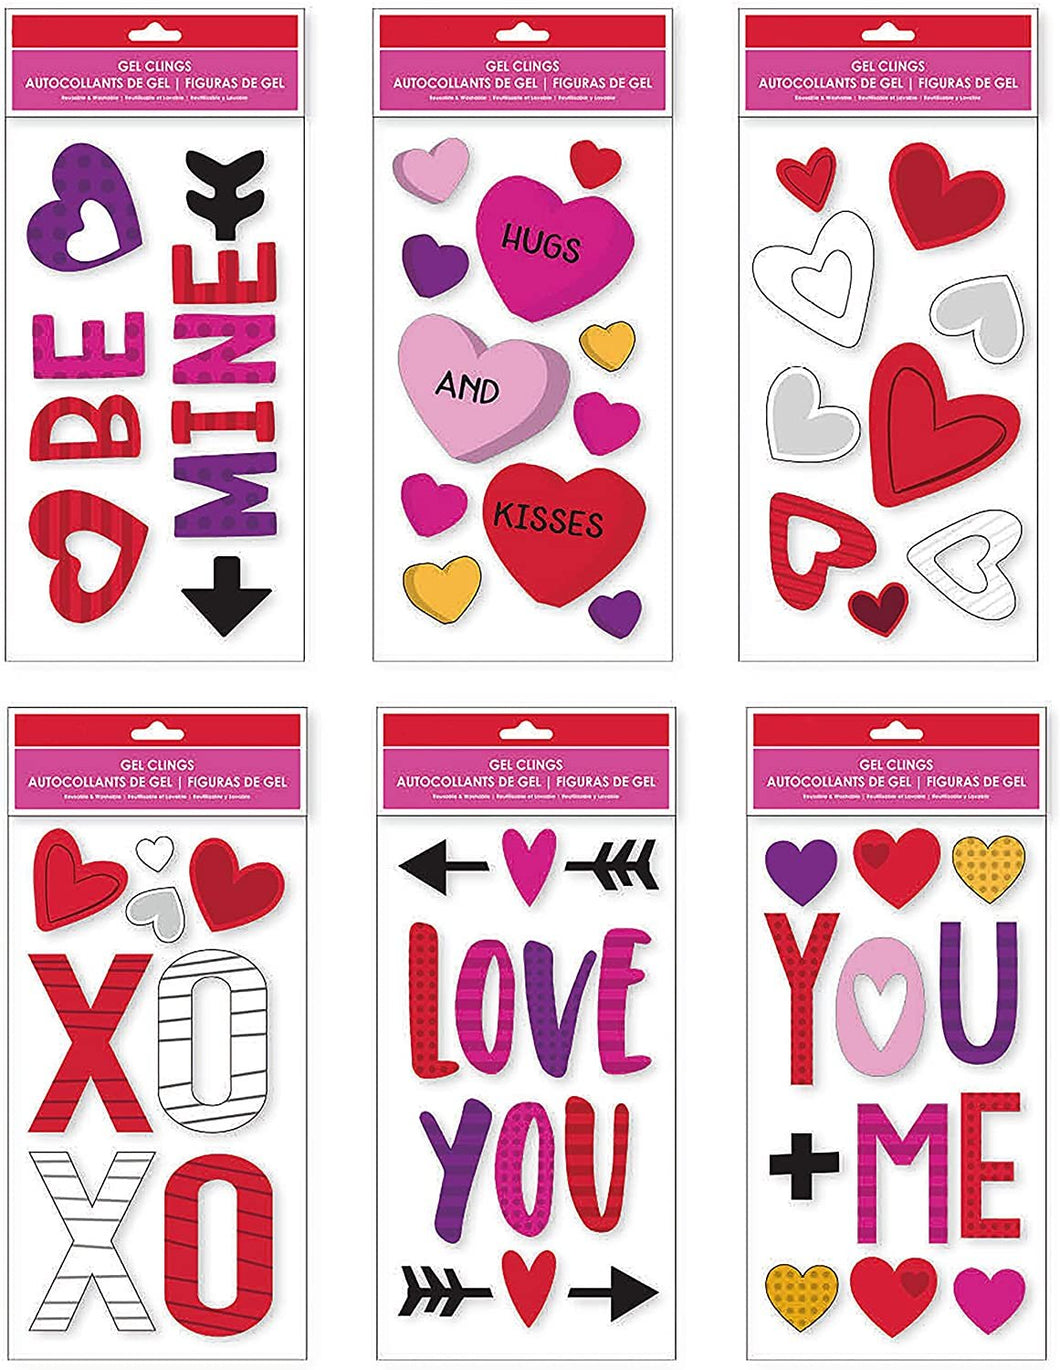 B-THERE Bundle of Valentine's Day Window Gel Clings, Hearts, Love, XOXO, Kisses, Be Mine